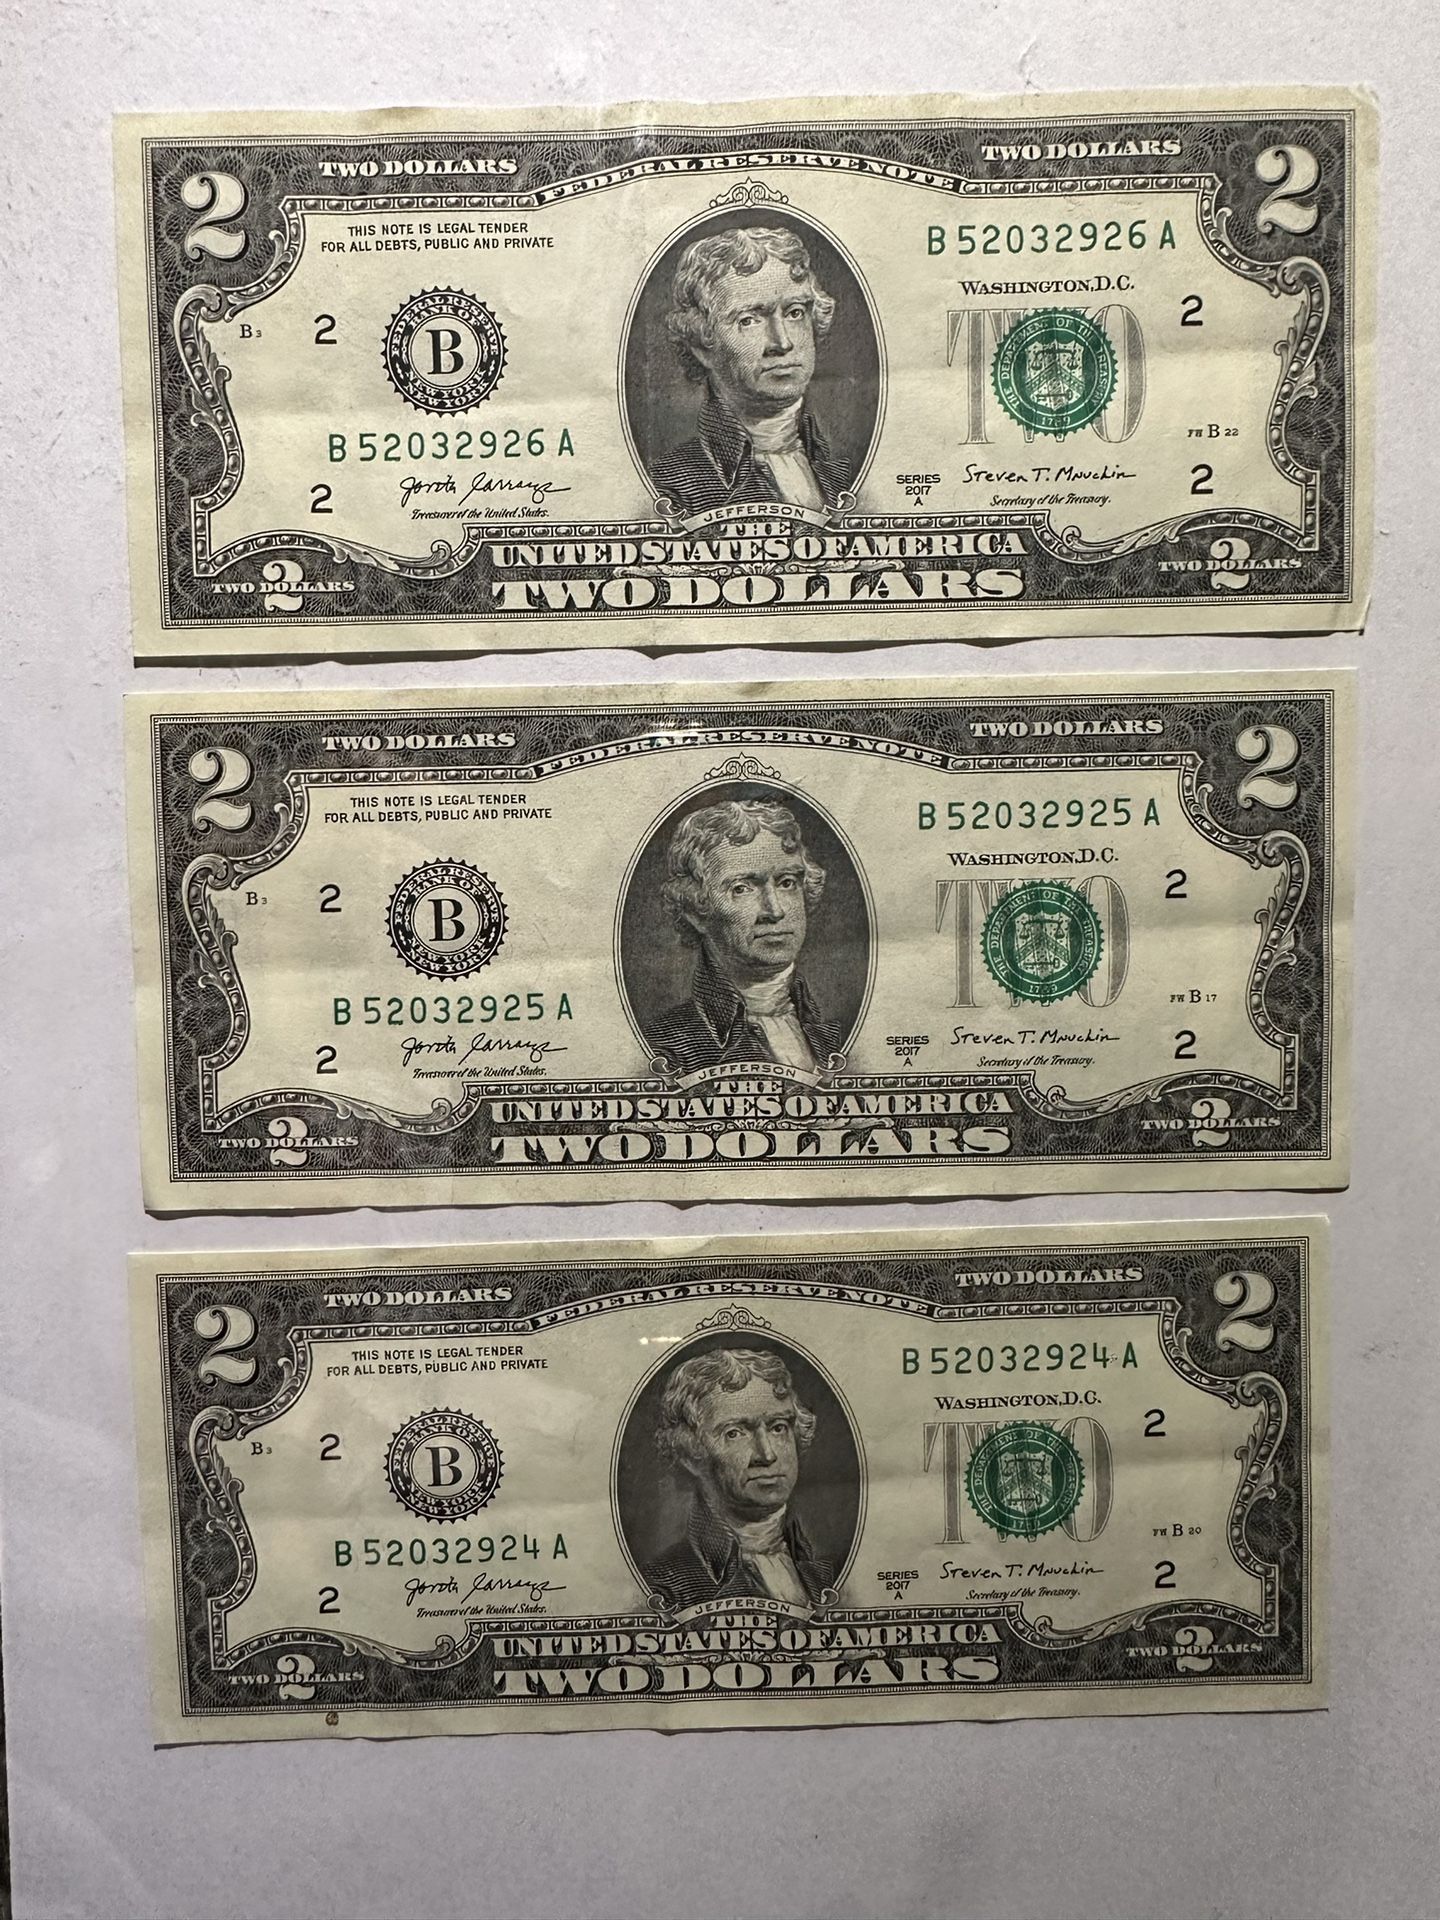 3x $2 Dollar Bills With Continuous Serial Number 